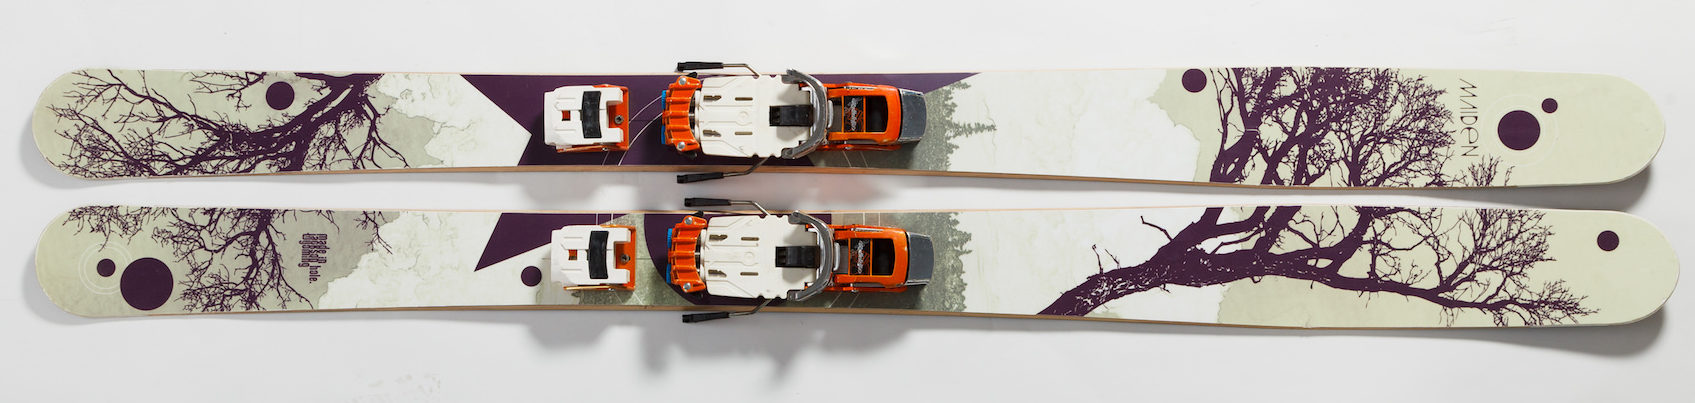 Maiden Skis - Branch Out Custom